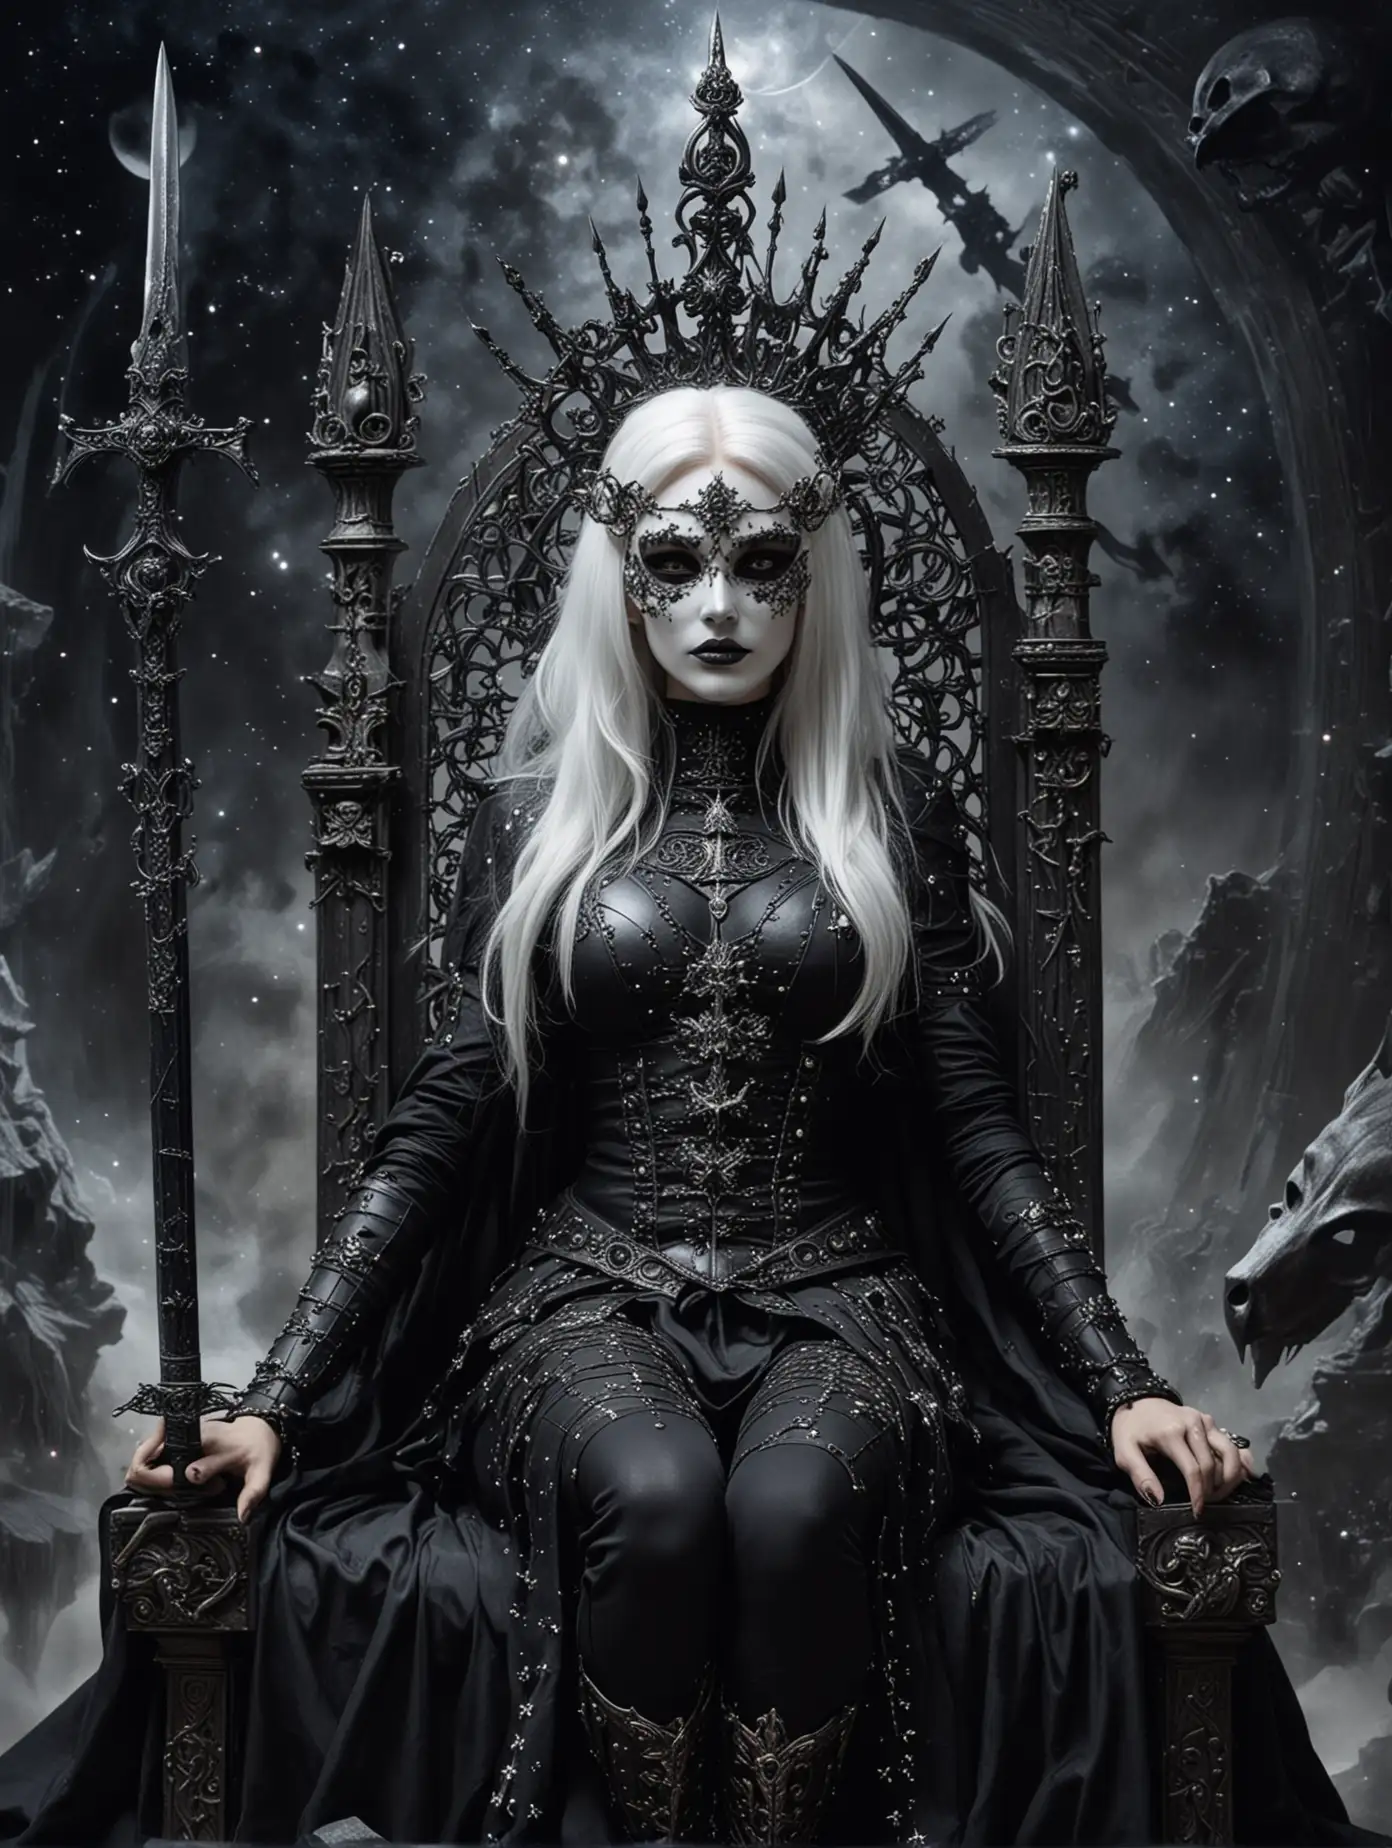 Goddess-Sister-Geherit-on-Cosmic-Throne-with-Black-Sword-and-White-Hair